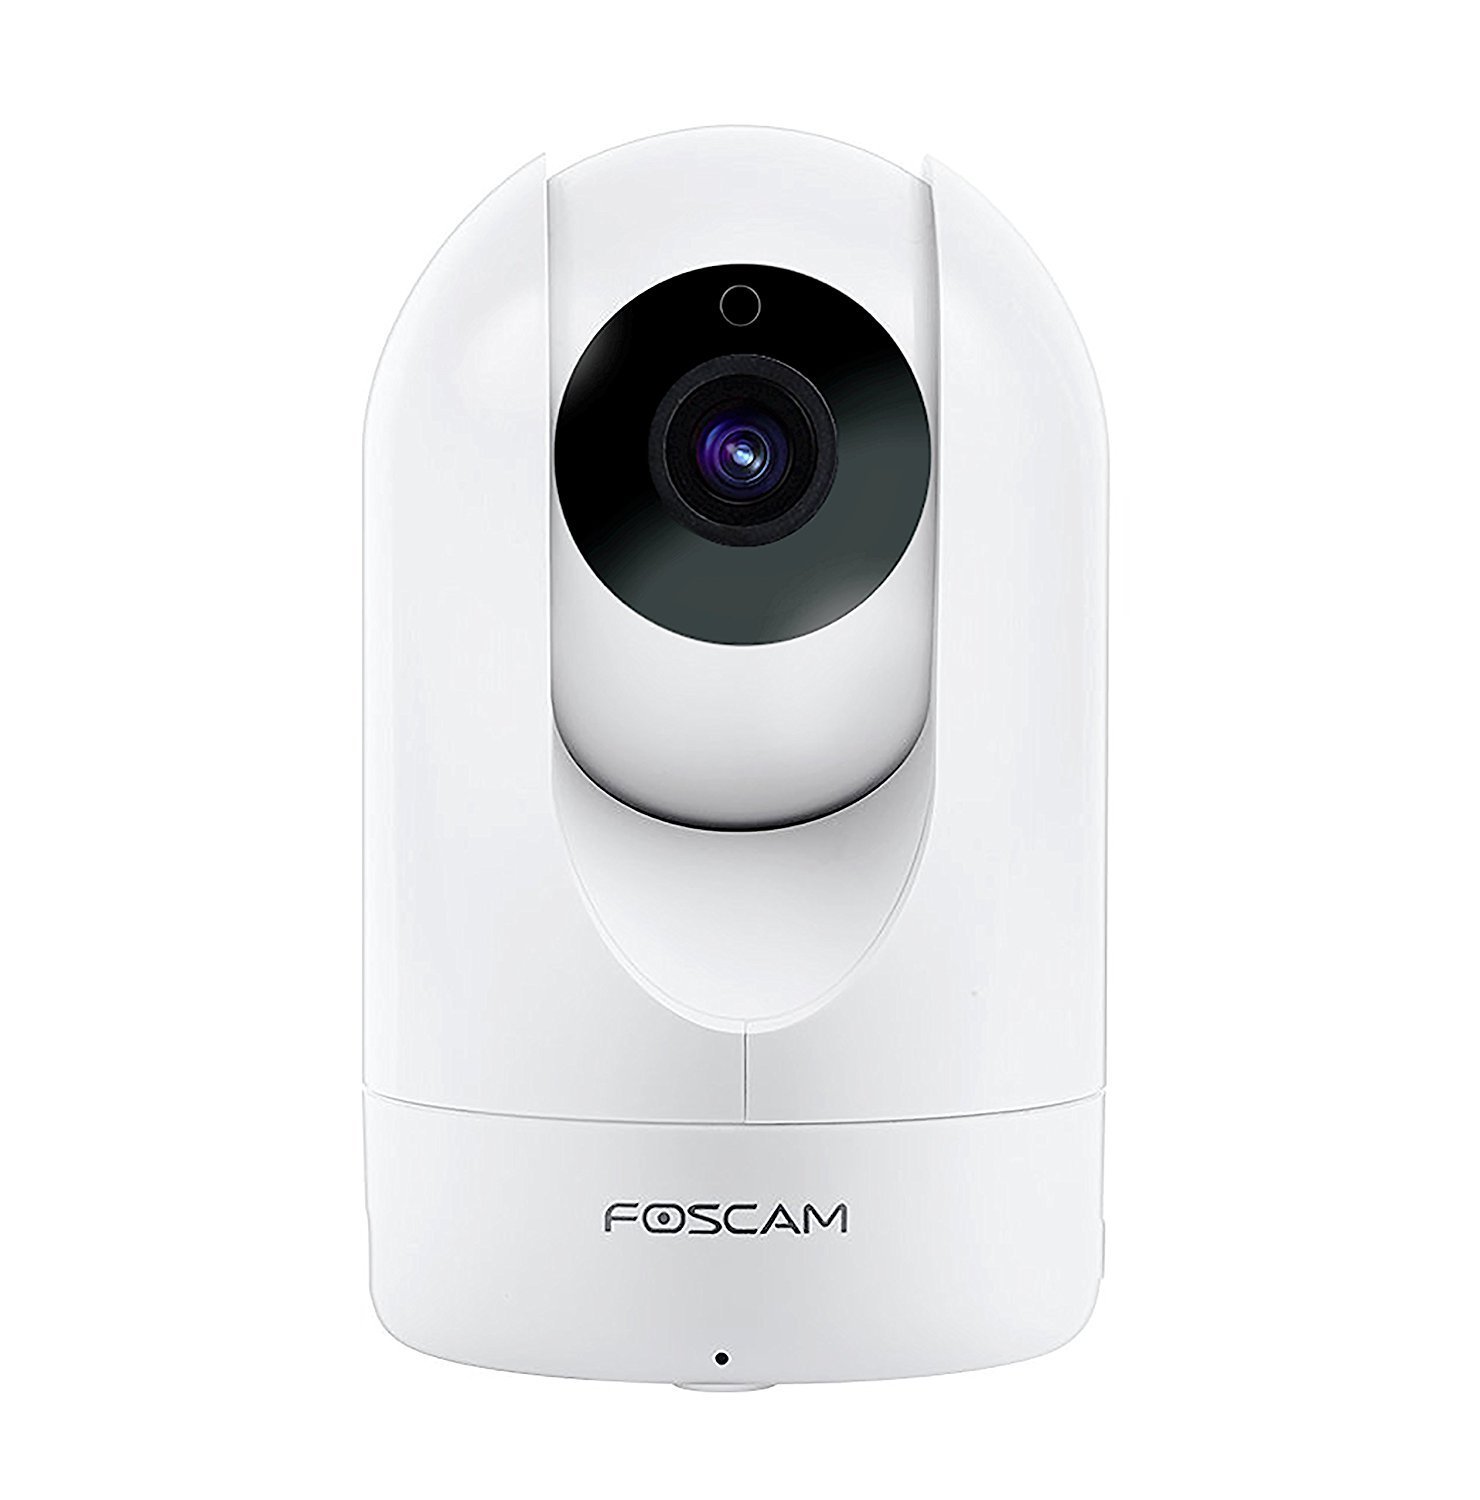 The Foscam Wireless Security Camera is an essential addition to any home security system, that will help you rest easy.  <br/><br/> You can pick this up at  <a href="https://amzn.to/2GC6fmS">Amazon for about $75.95</a>.